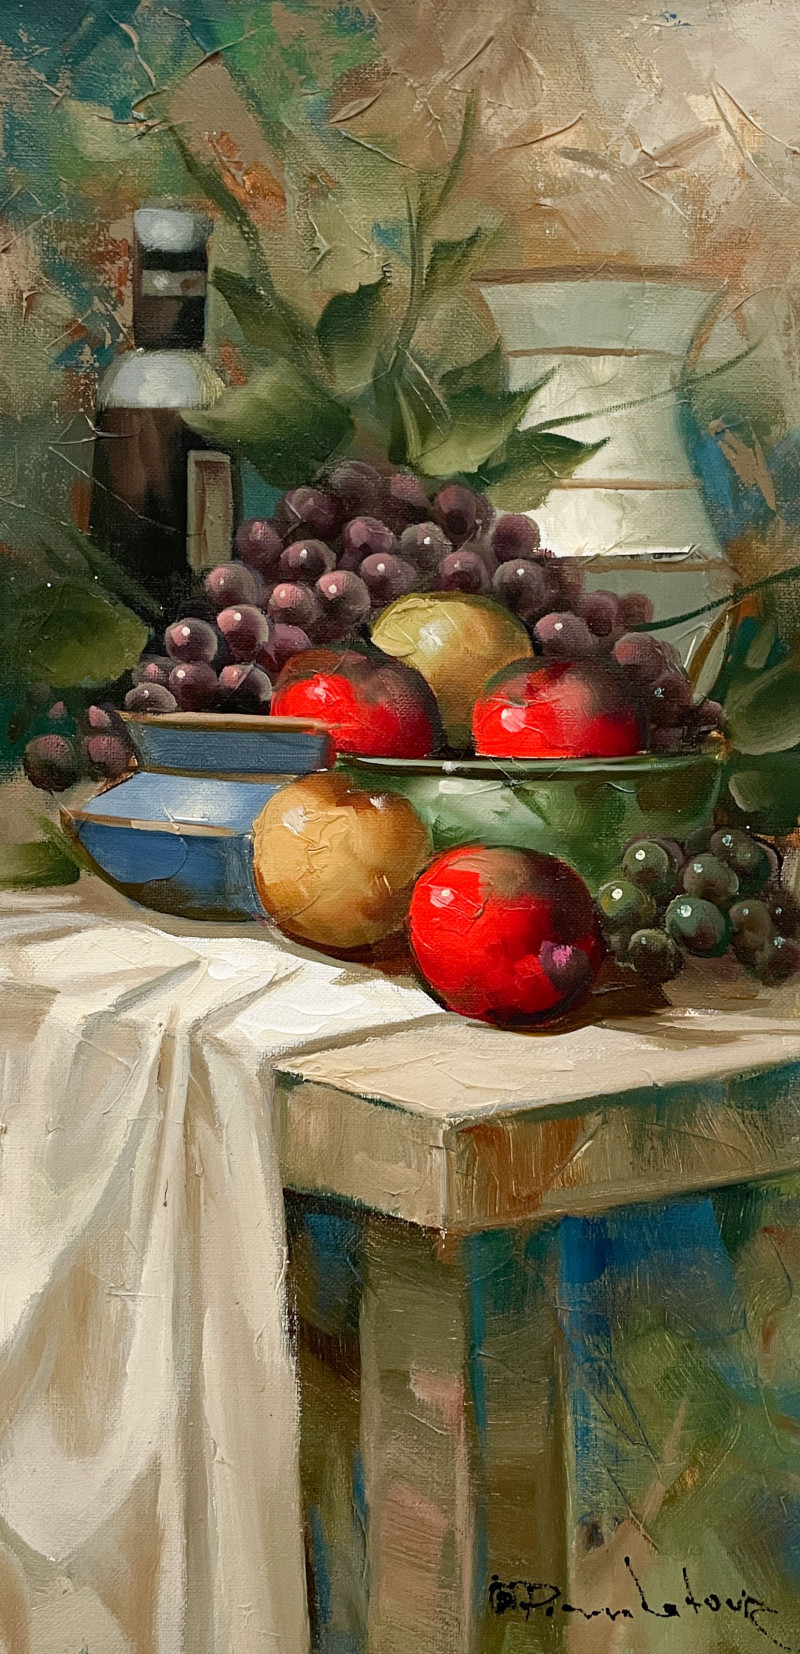 Pierre Latour - Still Life with Apples and Grapes (2)